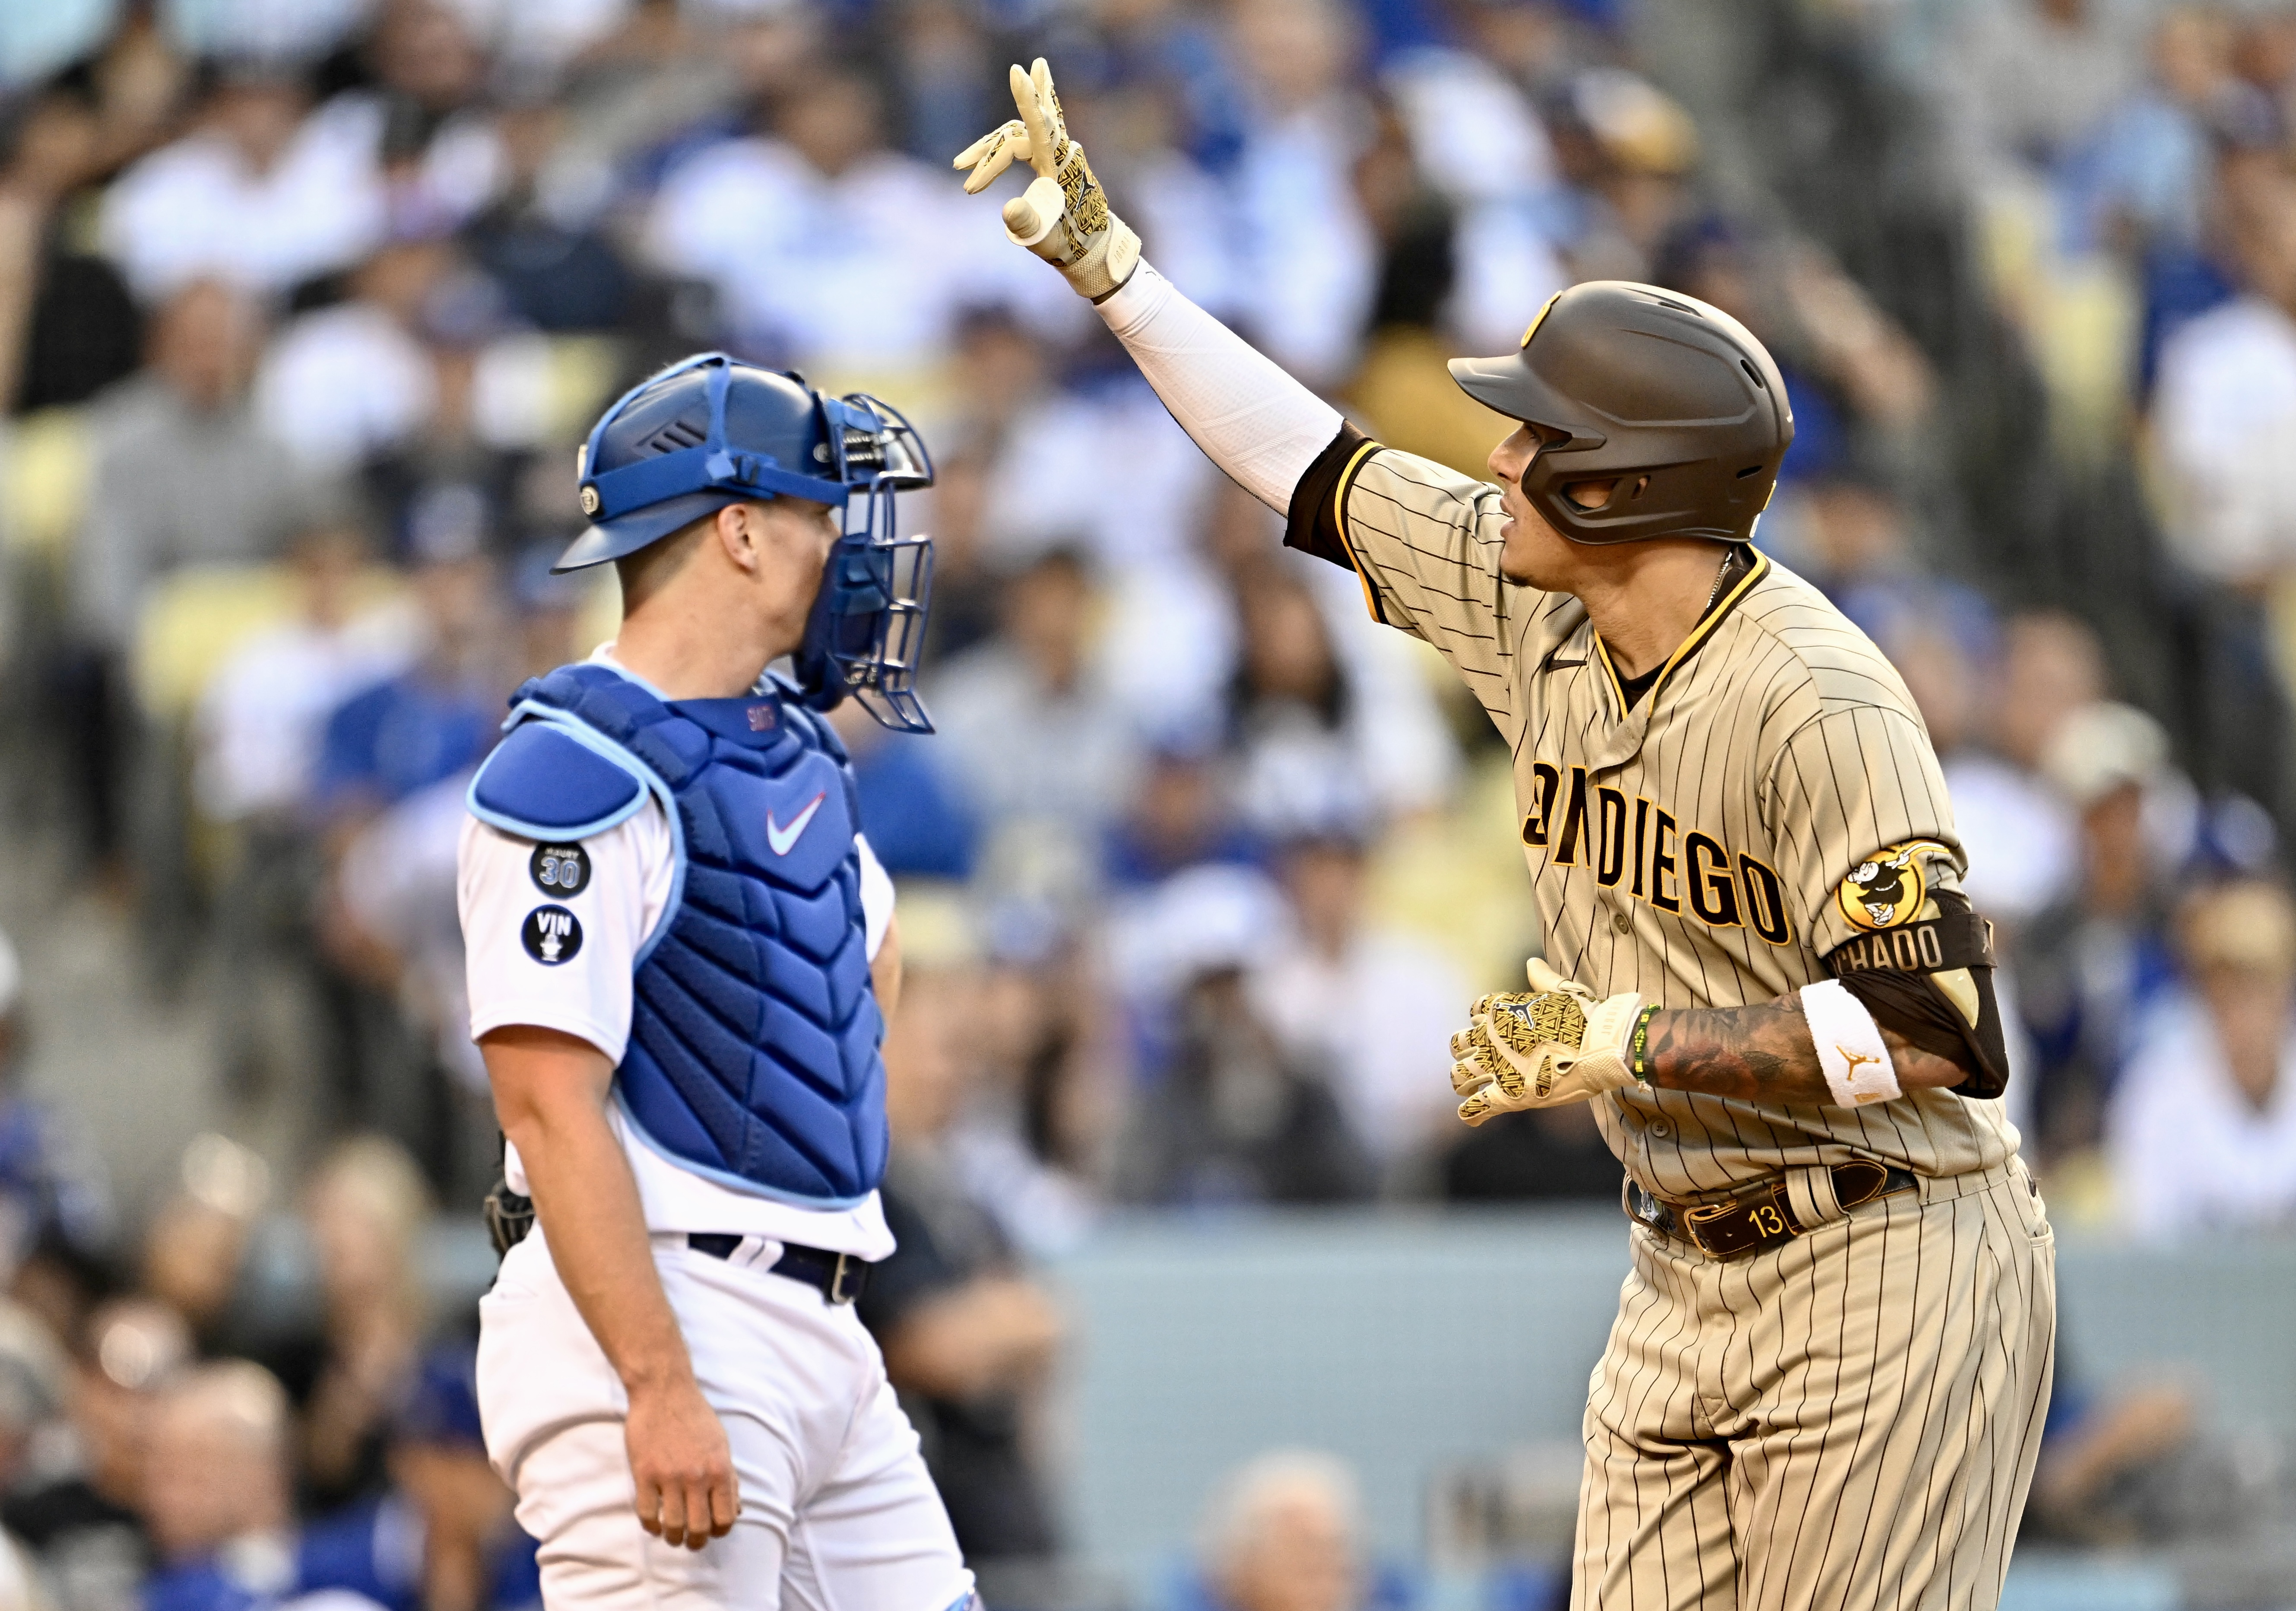 San Diego Padres defeated the Los Angeles Dodgers 5-3 during Game 2 of a National League Division Series baseball game at Dodger Stadium.